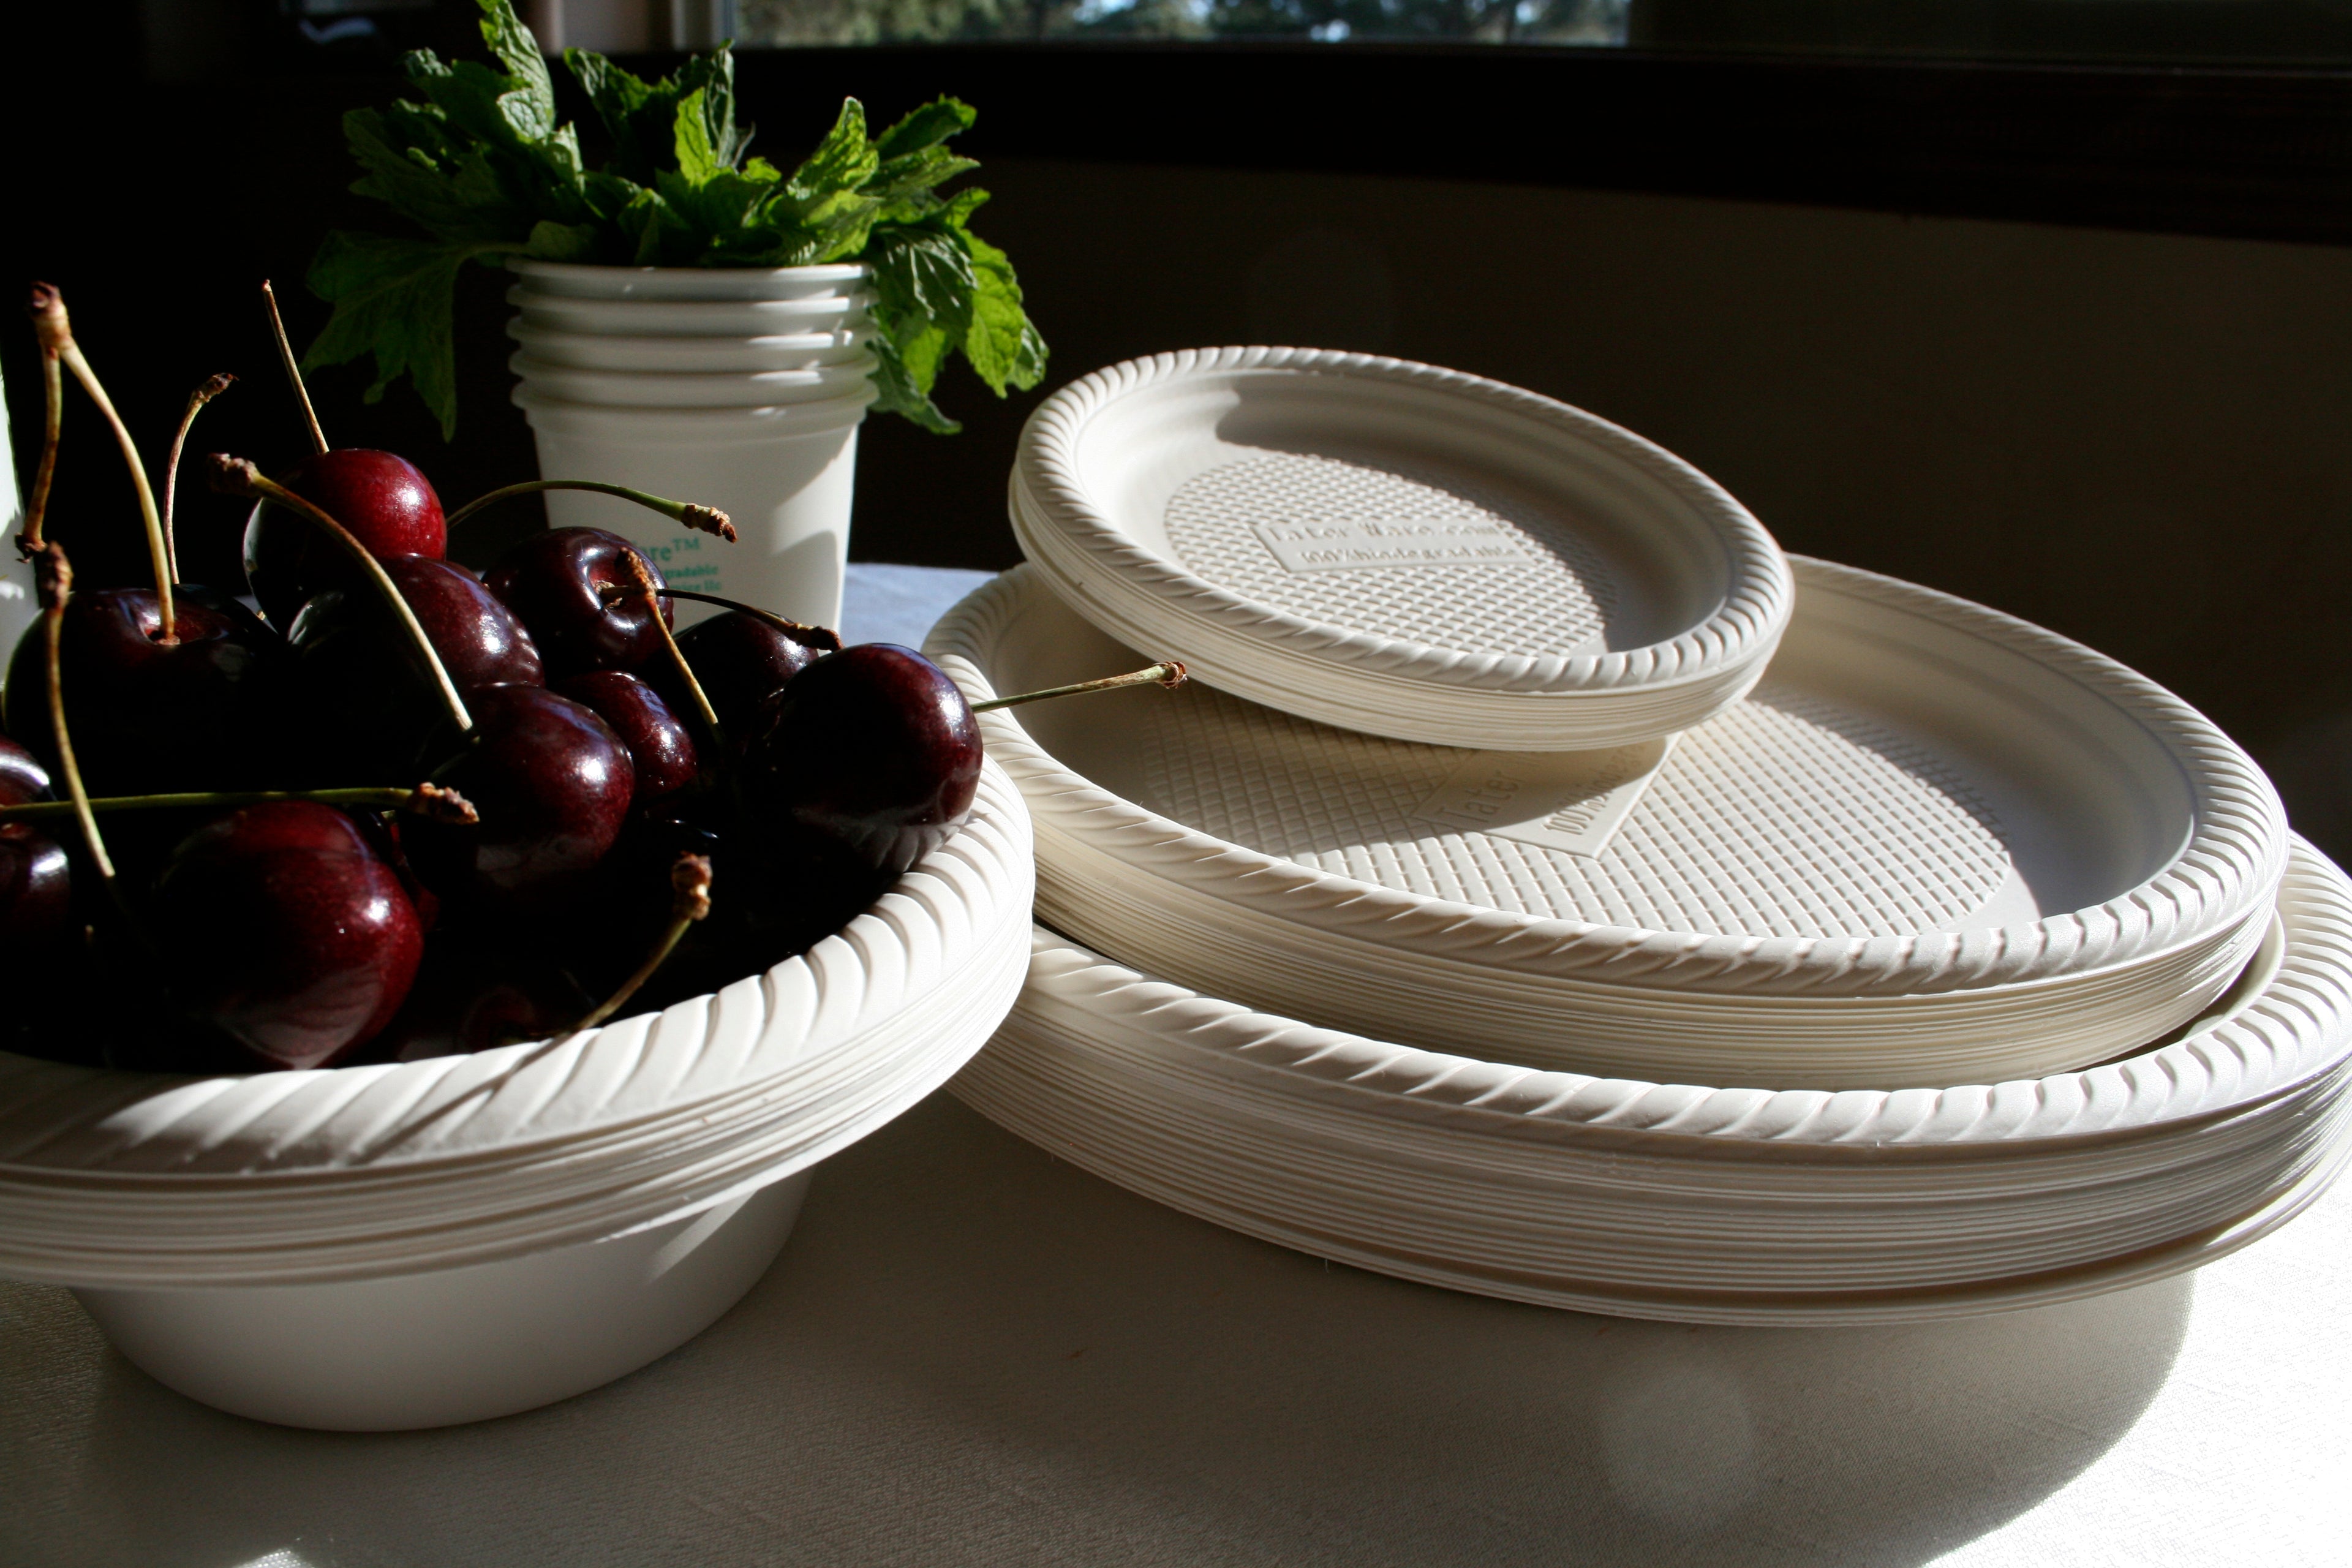 https://earth-to-go.com/cdn/shop/files/TW_PLATES_AND_TW_BOWL_WITH_CHERRIES.jpg?v=1690378320&width=3840